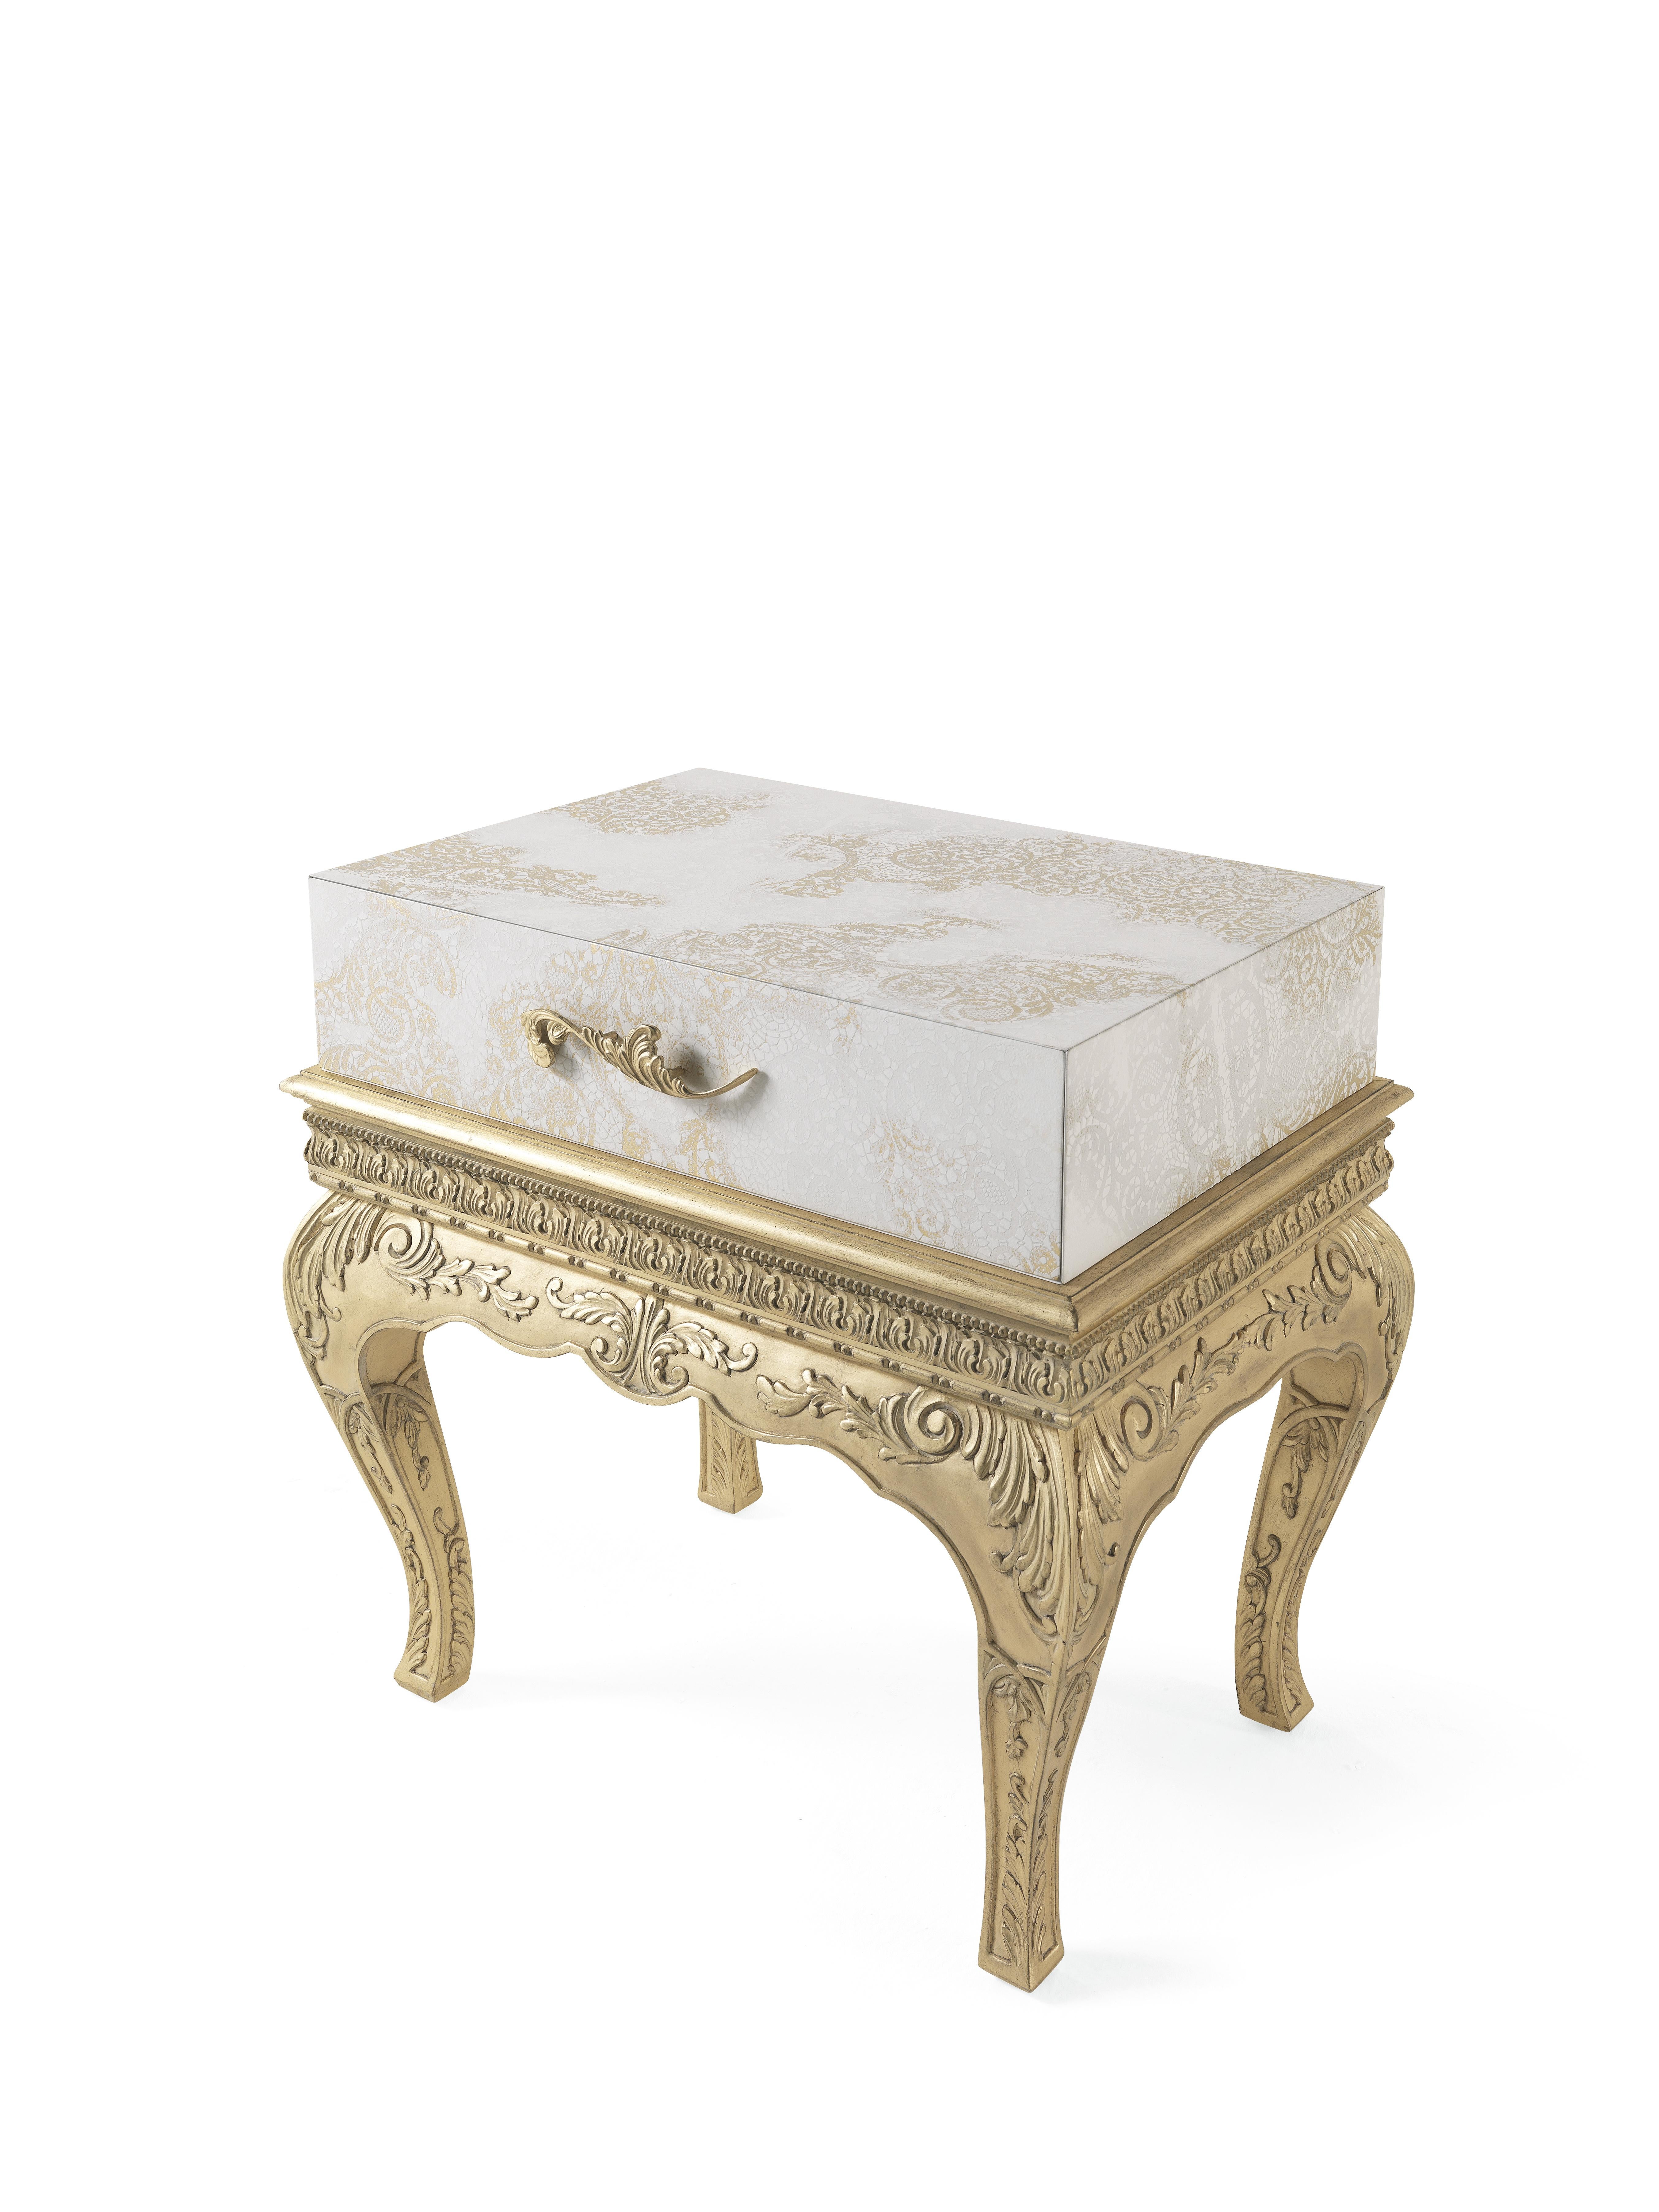 The night table of the Brocart line completes the bedroom furniture with its refined style that evokes the luxury of the 17th and 18th century French noble courts. The base, with hand-carved legs and antique gold leaf finishing in
pure classic style